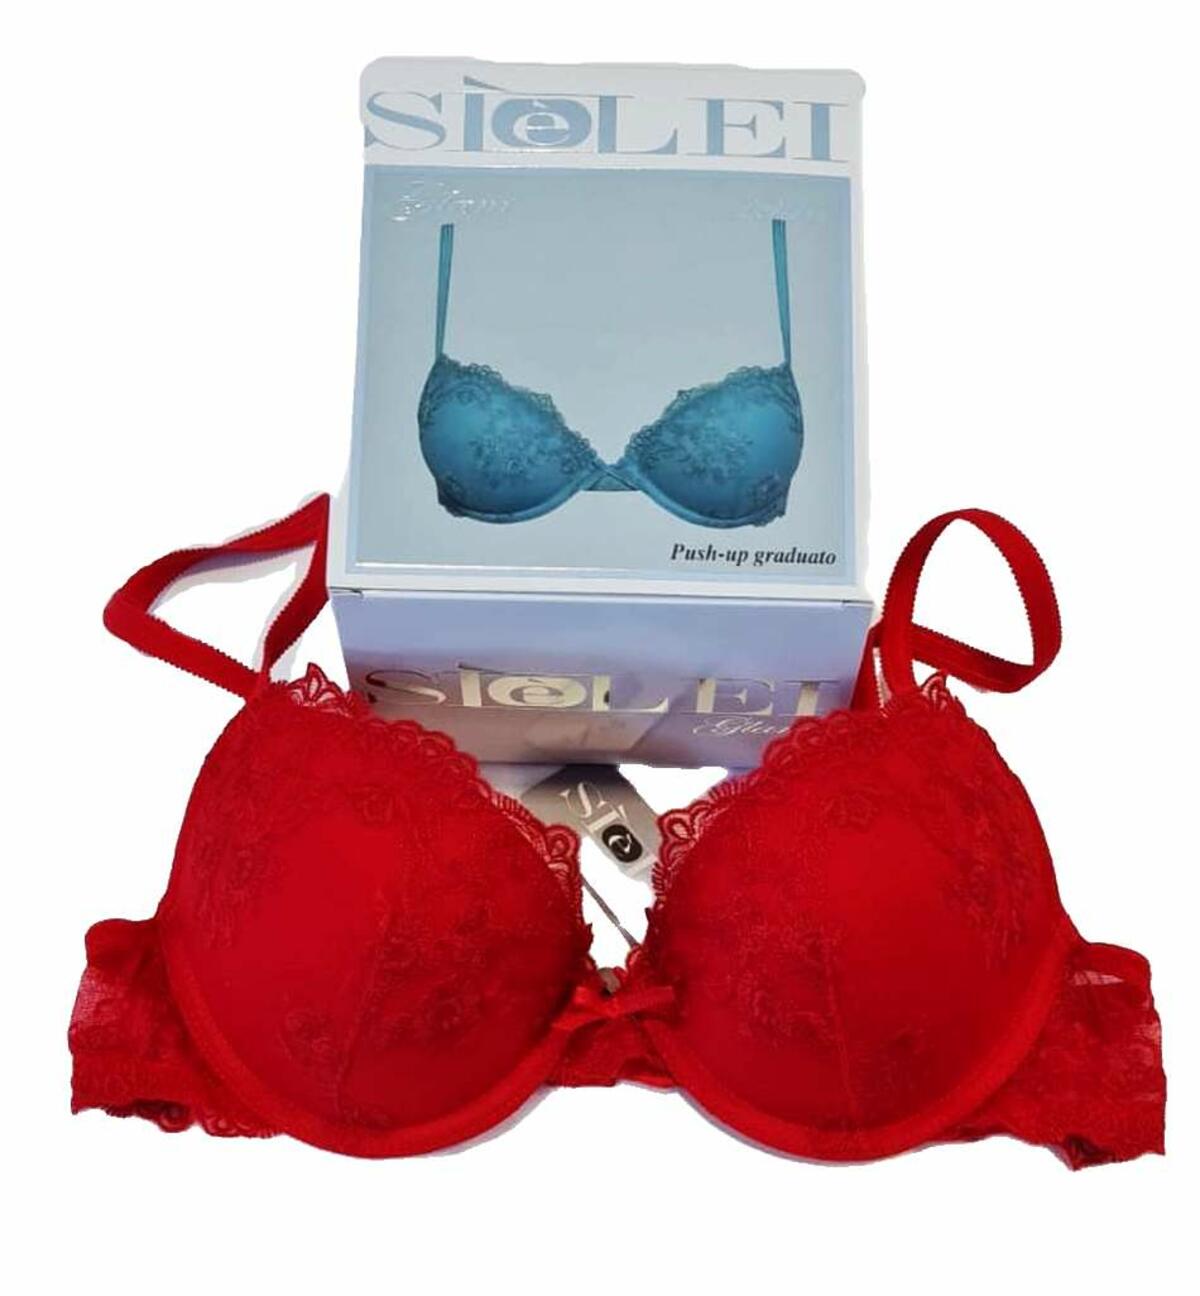 SièLei Push Up Bra with Graduated Cups